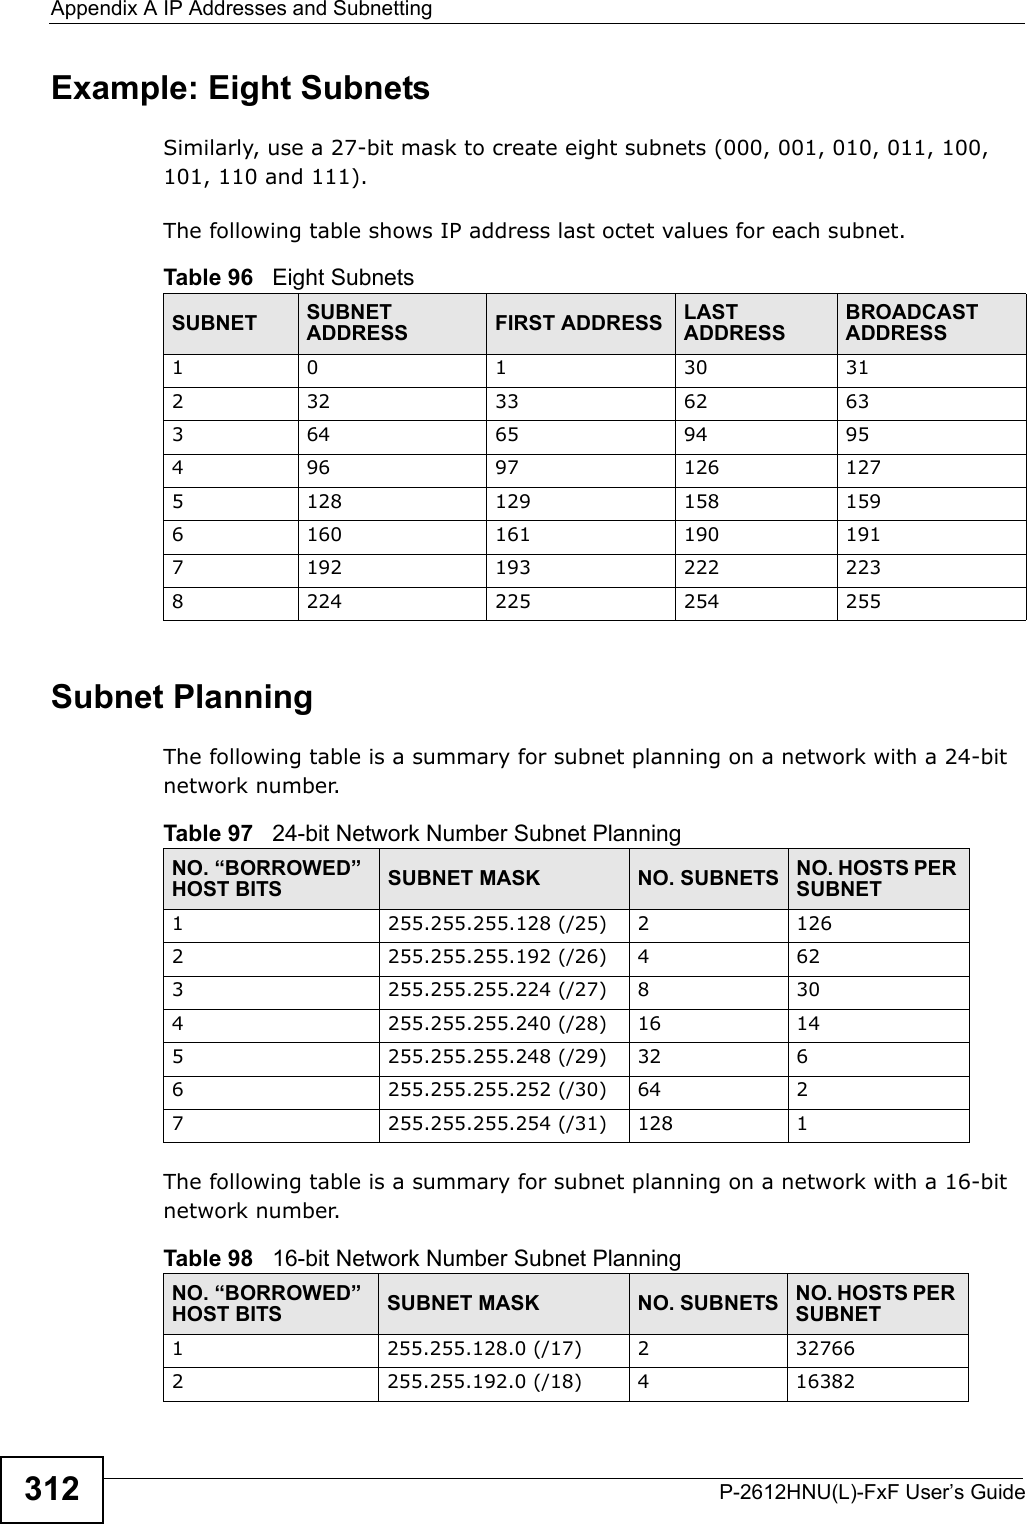 Appendix A IP Addresses and SubnettingP-2612HNU(L)-FxF User’s Guide312Example: Eight SubnetsSimilarly, use a 27-bit mask to create eight subnets (000, 001, 010, 011, 100,101, 110 and 111). The following table shows IP address last octet values for each subnet.Subnet PlanningThe following table is a summary for subnet planning on a network with a 24-bit network number.The following table is a summary for subnet planning on a network with a 16-bit network number. Table 96   Eight SubnetsSUBNET SUBNET ADDRESS FIRST ADDRESS LAST ADDRESSBROADCAST ADDRESS1 0 1 30 312 32 33 62 633 64 65 94 954 96 97 126 1275 128 129 158 1596 160 161 190 1917 192 193 222 2238 224 225 254 255Table 97   24-bit Network Number Subnet PlanningNO. “BORROWED” HOST BITS SUBNET MASK NO. SUBNETS NO. HOSTS PER SUBNET1 255.255.255.128 (/25) 2 1262 255.255.255.192 (/26) 4 623 255.255.255.224 (/27) 8 304 255.255.255.240 (/28) 16 145 255.255.255.248 (/29) 32 66 255.255.255.252 (/30) 64 27 255.255.255.254 (/31) 128 1Table 98   16-bit Network Number Subnet PlanningNO. “BORROWED” HOST BITS SUBNET MASK NO. SUBNETS NO. HOSTS PER SUBNET1 255.255.128.0 (/17) 2 327662 255.255.192.0 (/18) 4 16382